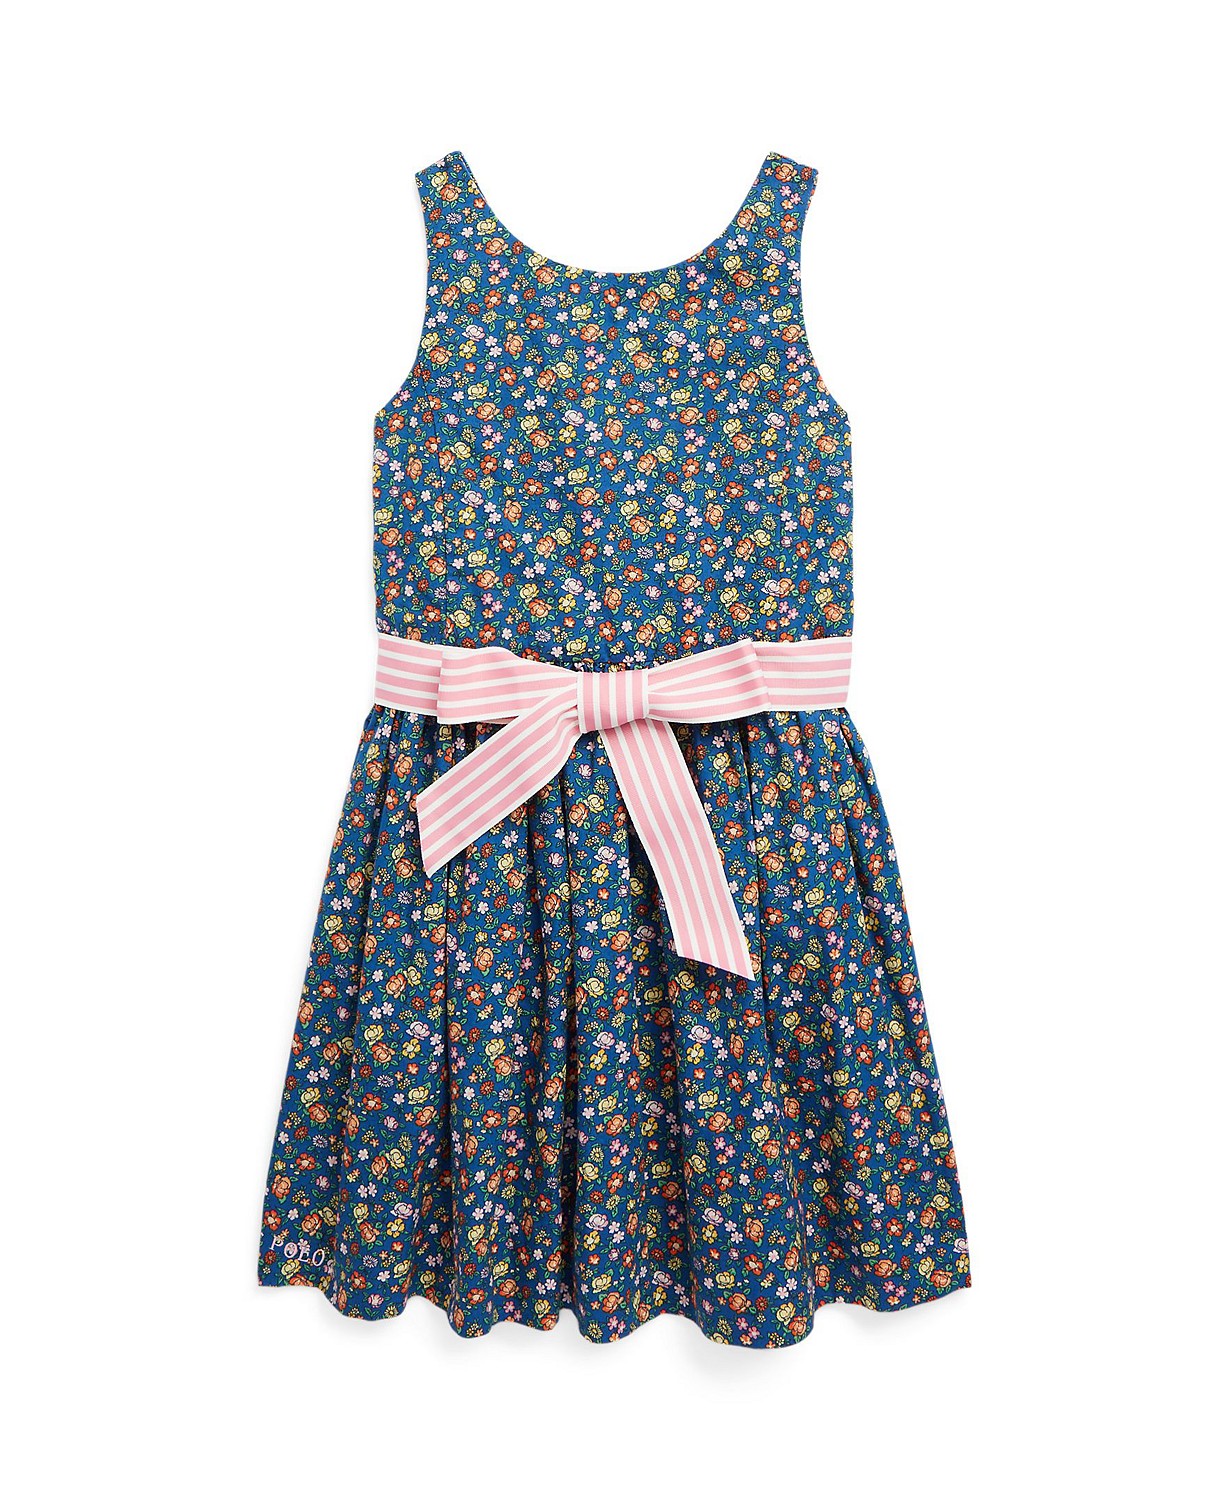 Toddler and Little Girls Floral Cotton Poplin Fit and Flare Dress with Bloomer